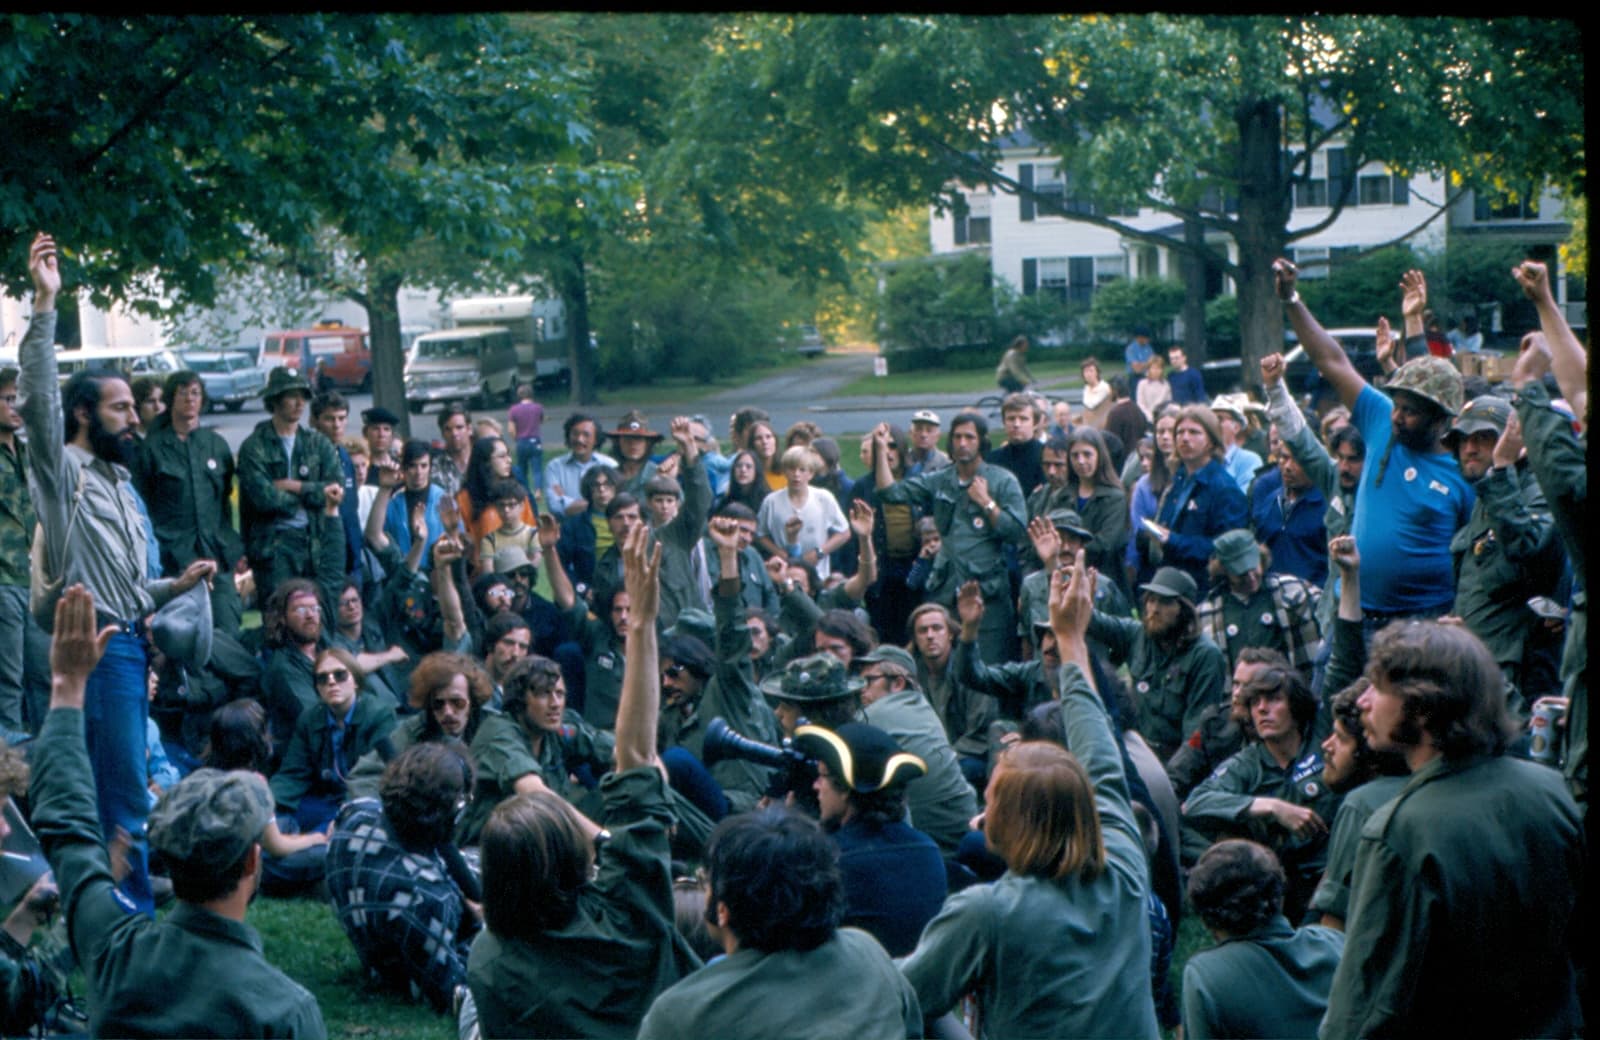 Chris Gregory (seated on lower right with Air Force wings on his fatigues) and other veterans take a vote on the green after being served an injunction from the Lexington Select Board about whether or not to commit civil disobedience. (Courtesy Richard Robbat)